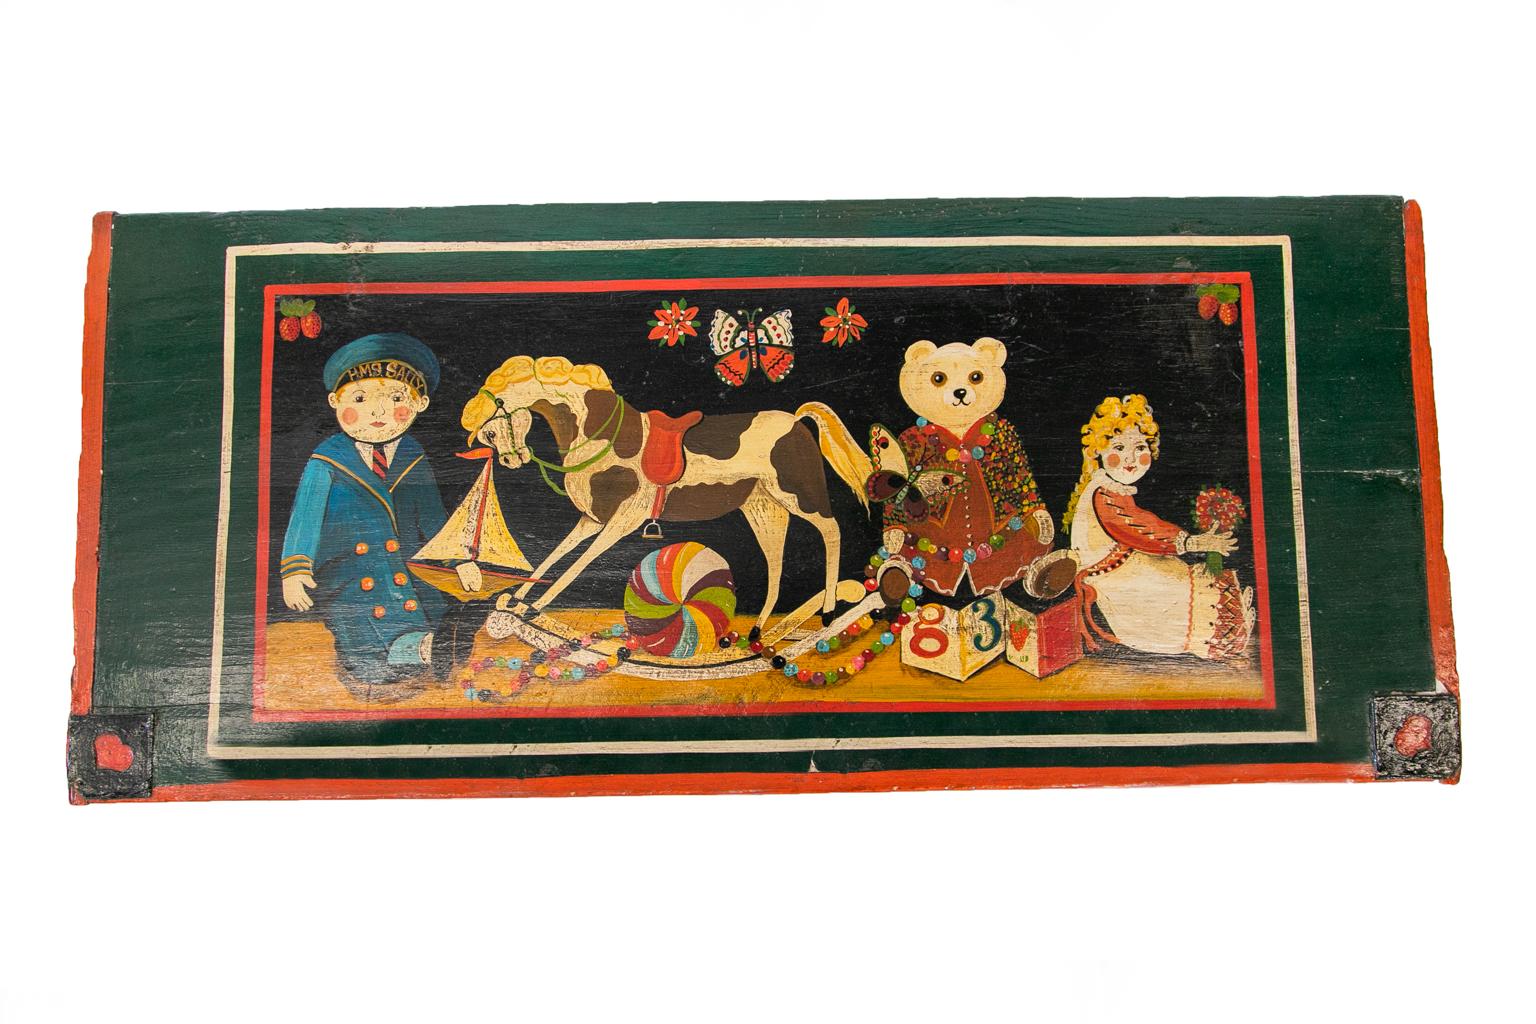 English Painted Blanket/Toy Chest has the original steel decorative straps and carrying handles. The scene depicts children with teddy bears, rocking horses, butterflies, and strawberry hearts in the corners.